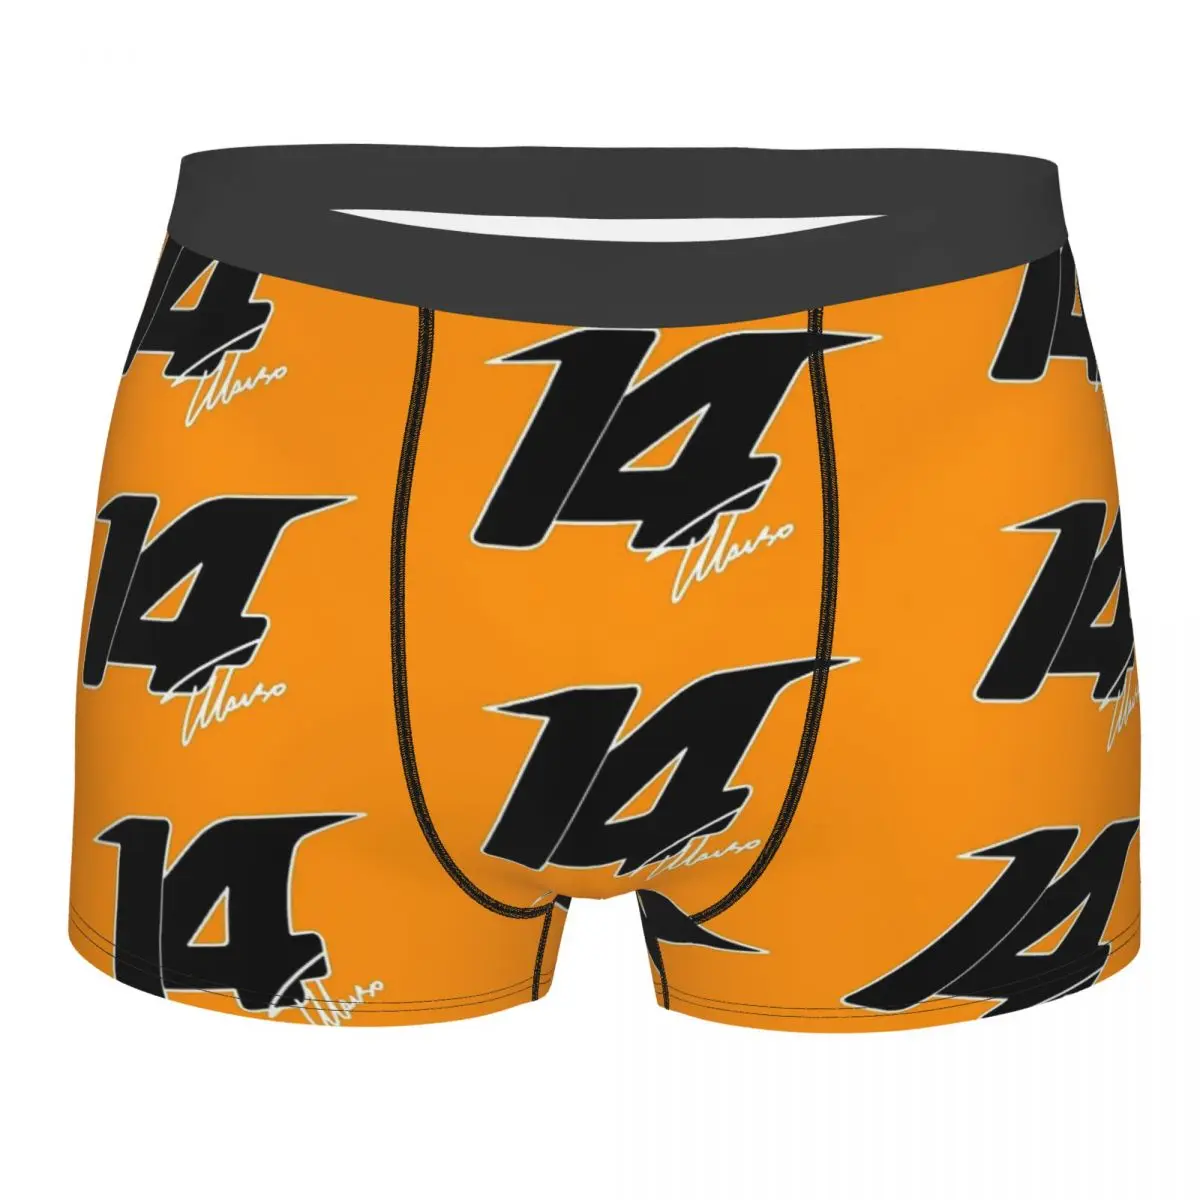 

Fernando Alonso 14 Men Printed Boxer Briefs Underpants Accessories Outfits Highly Breathable High Quality Gift Idea